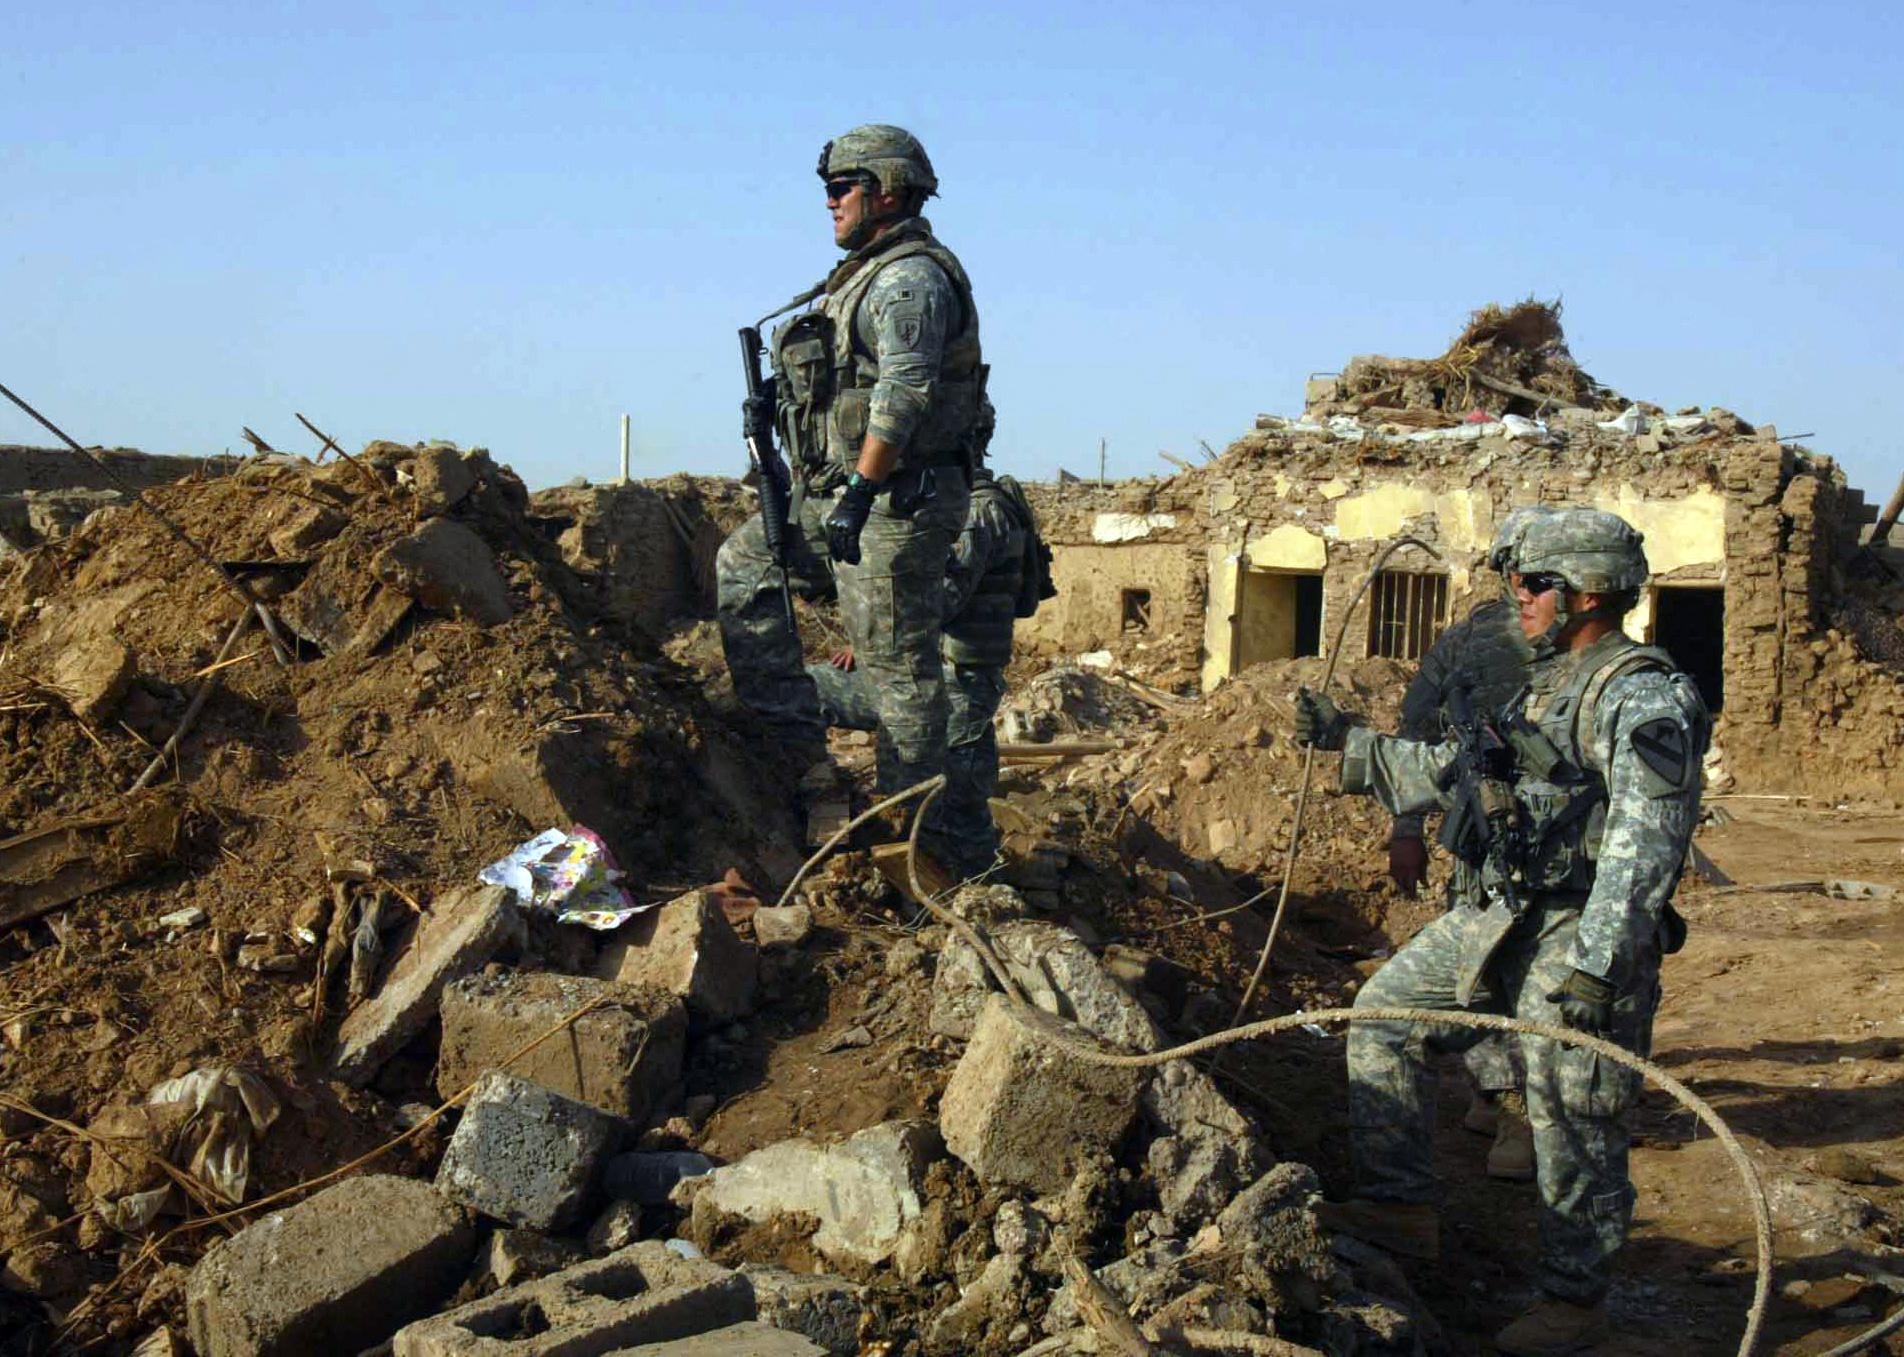 U.S. Army soldiers surveying damage in Iraq after a blast.